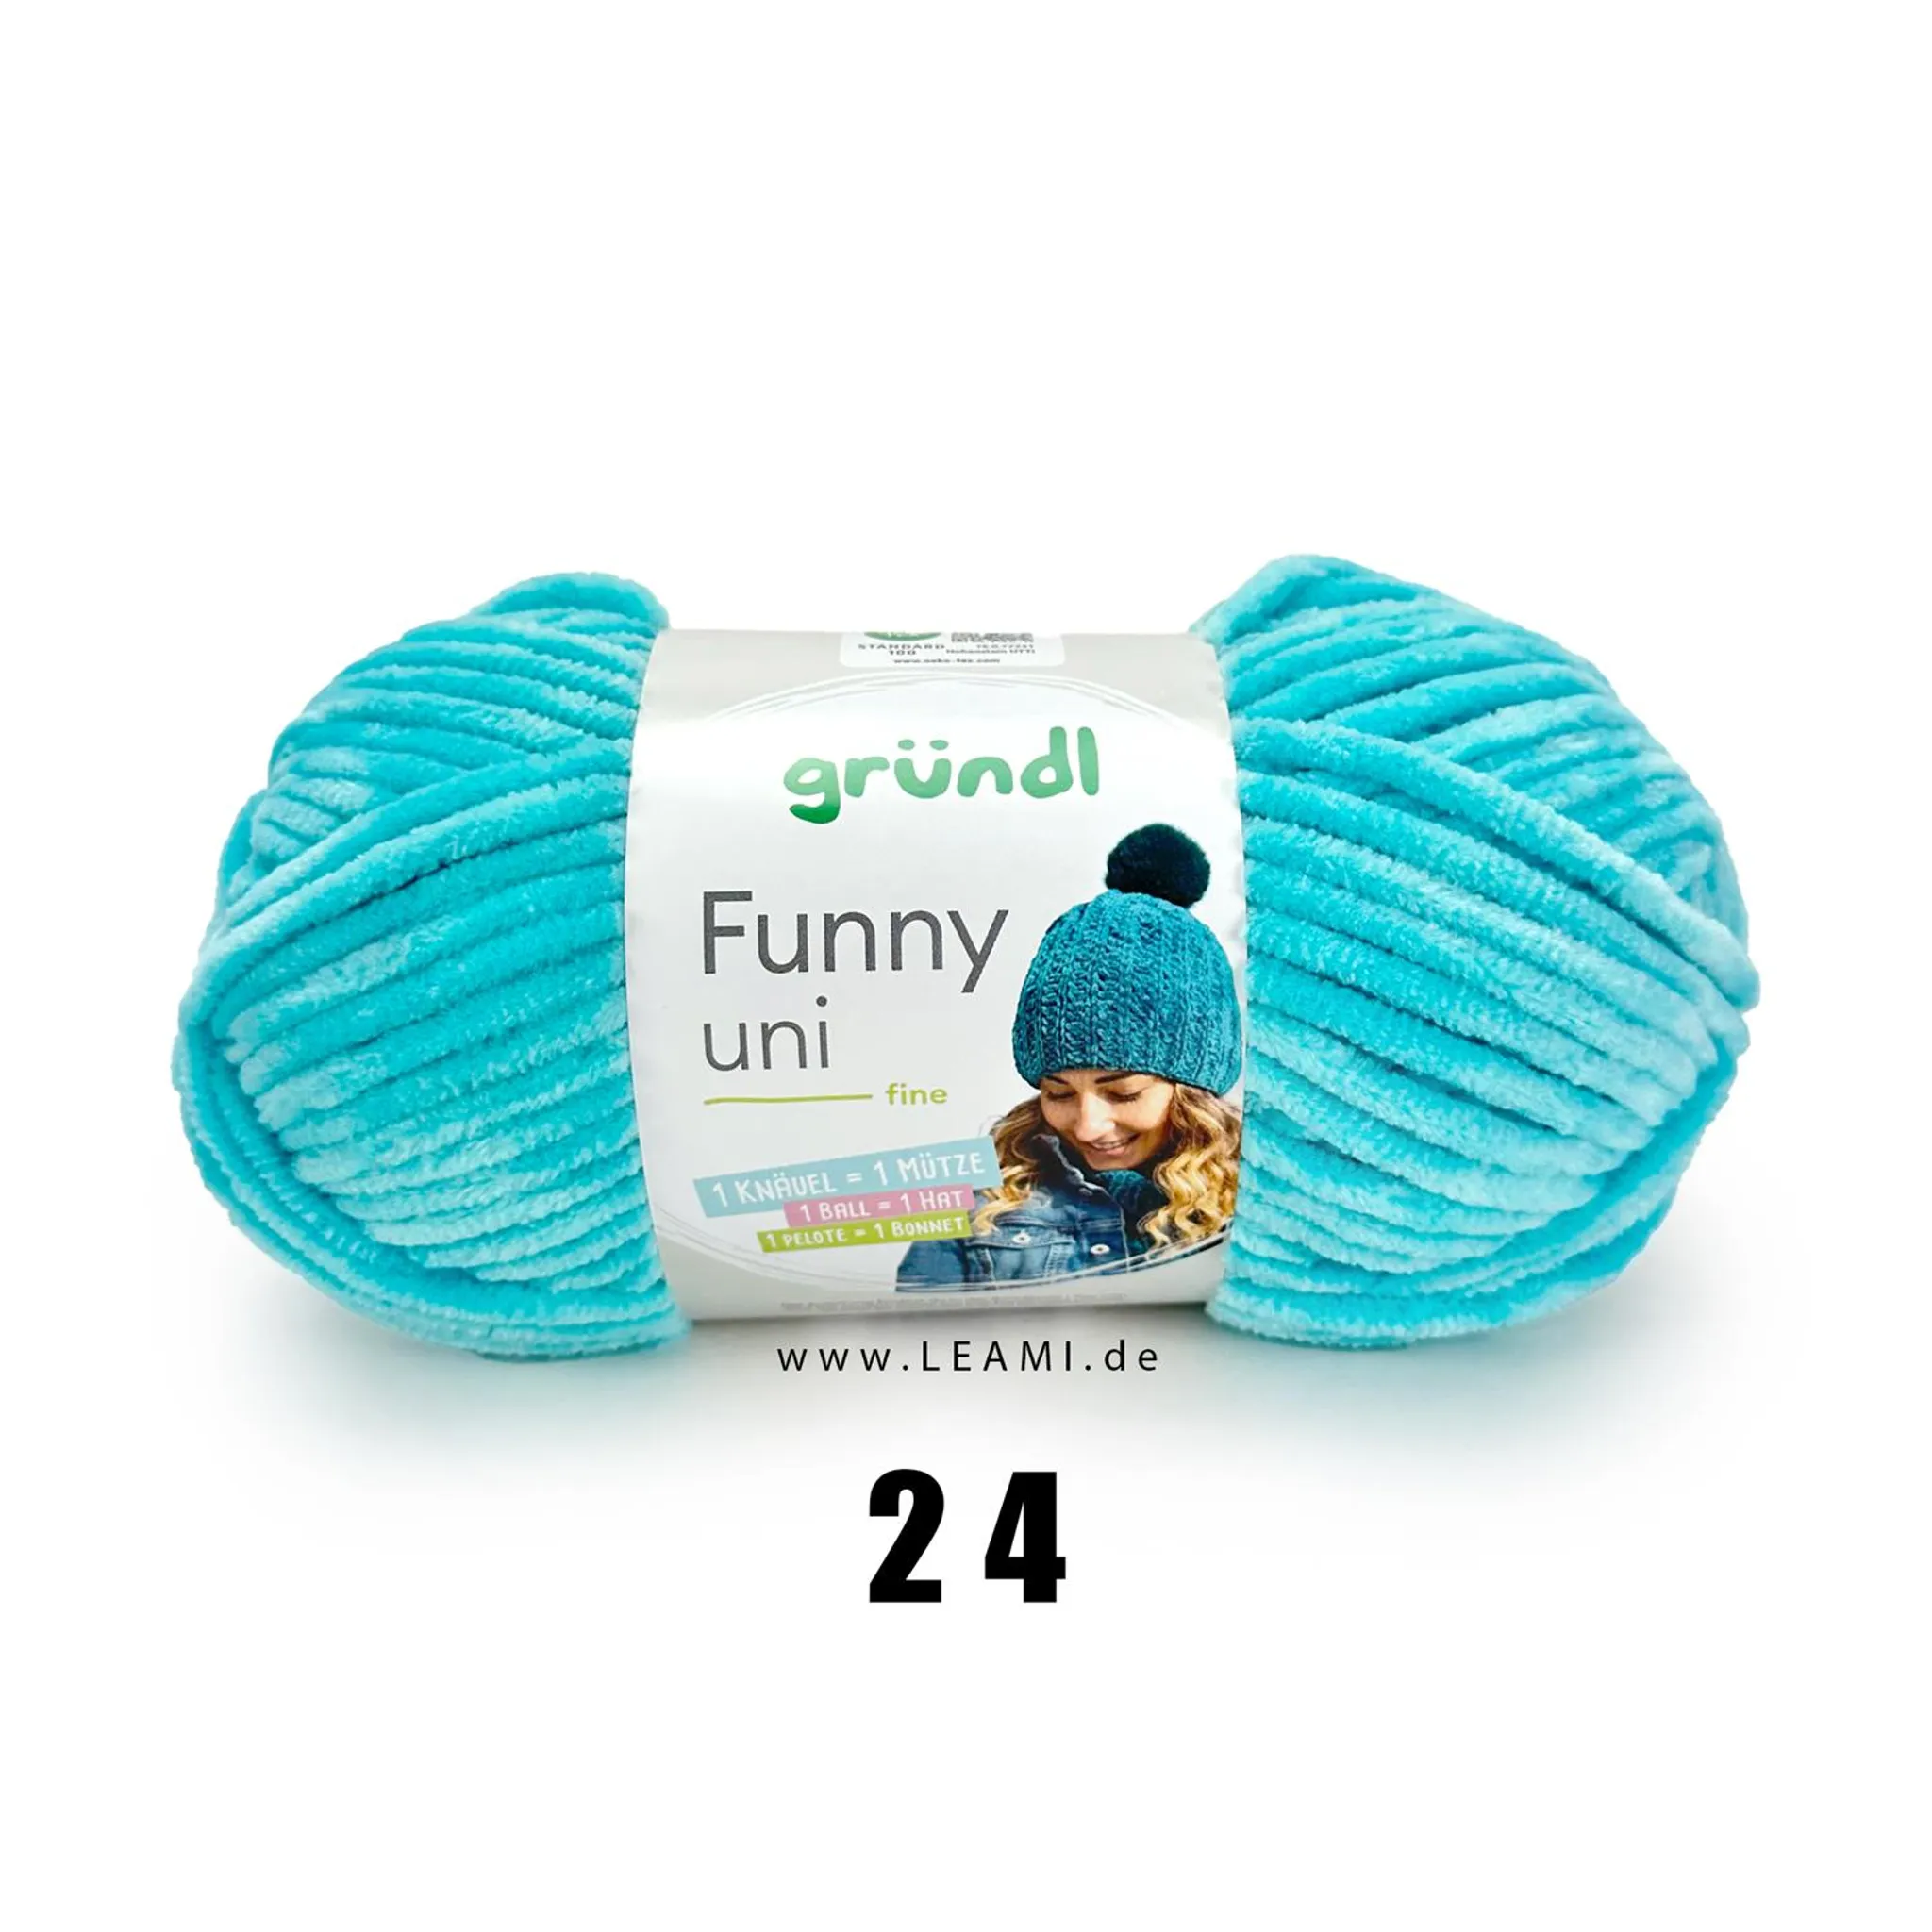 Gründl Funny (100g/120m) 24 turquoise Wolle